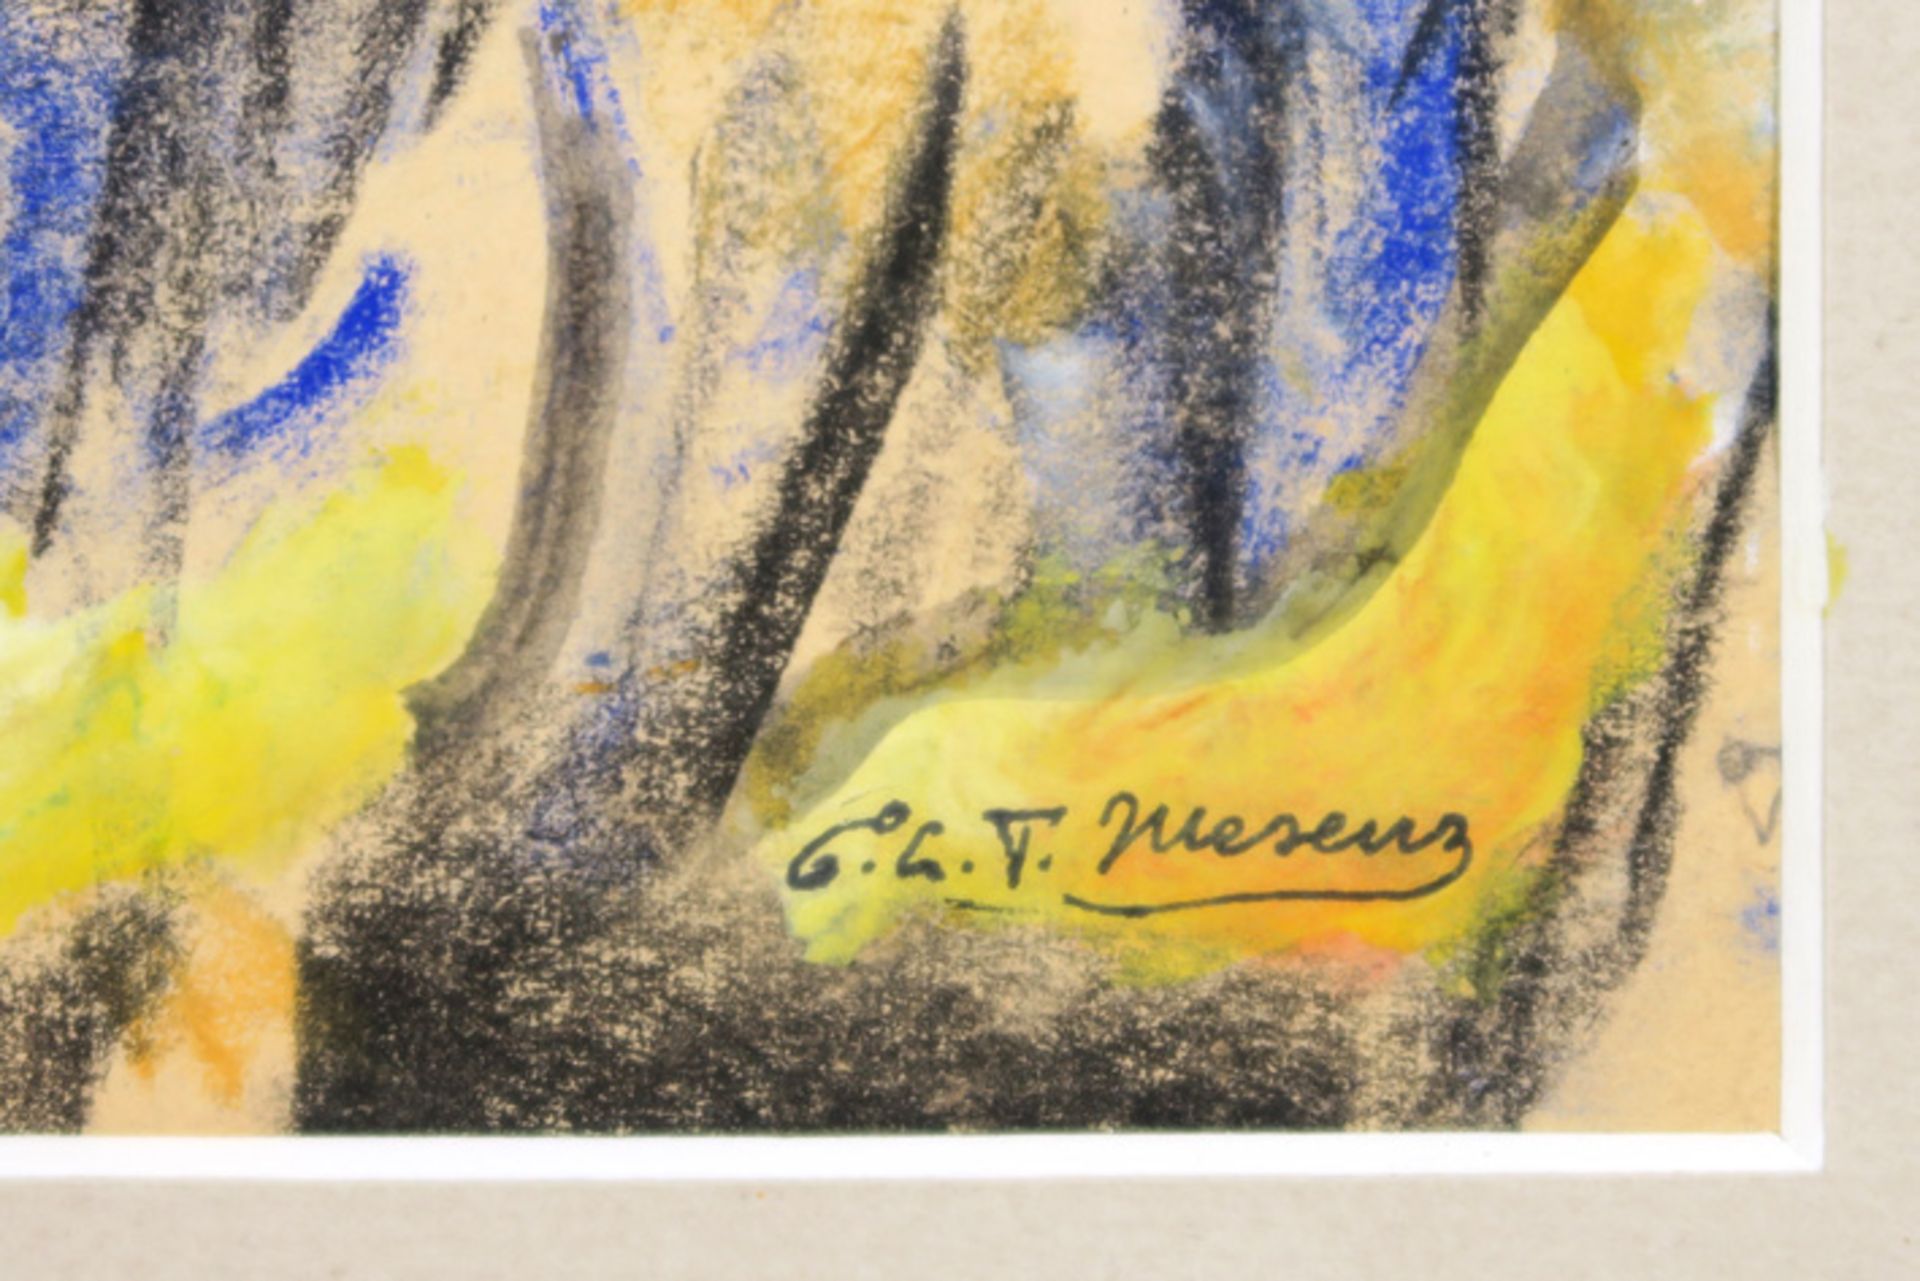 20th Cent. Belgian mixed media (charcoal and aquarelle) - signed Edouard L.T. Mesens || MESENS - Image 2 of 3